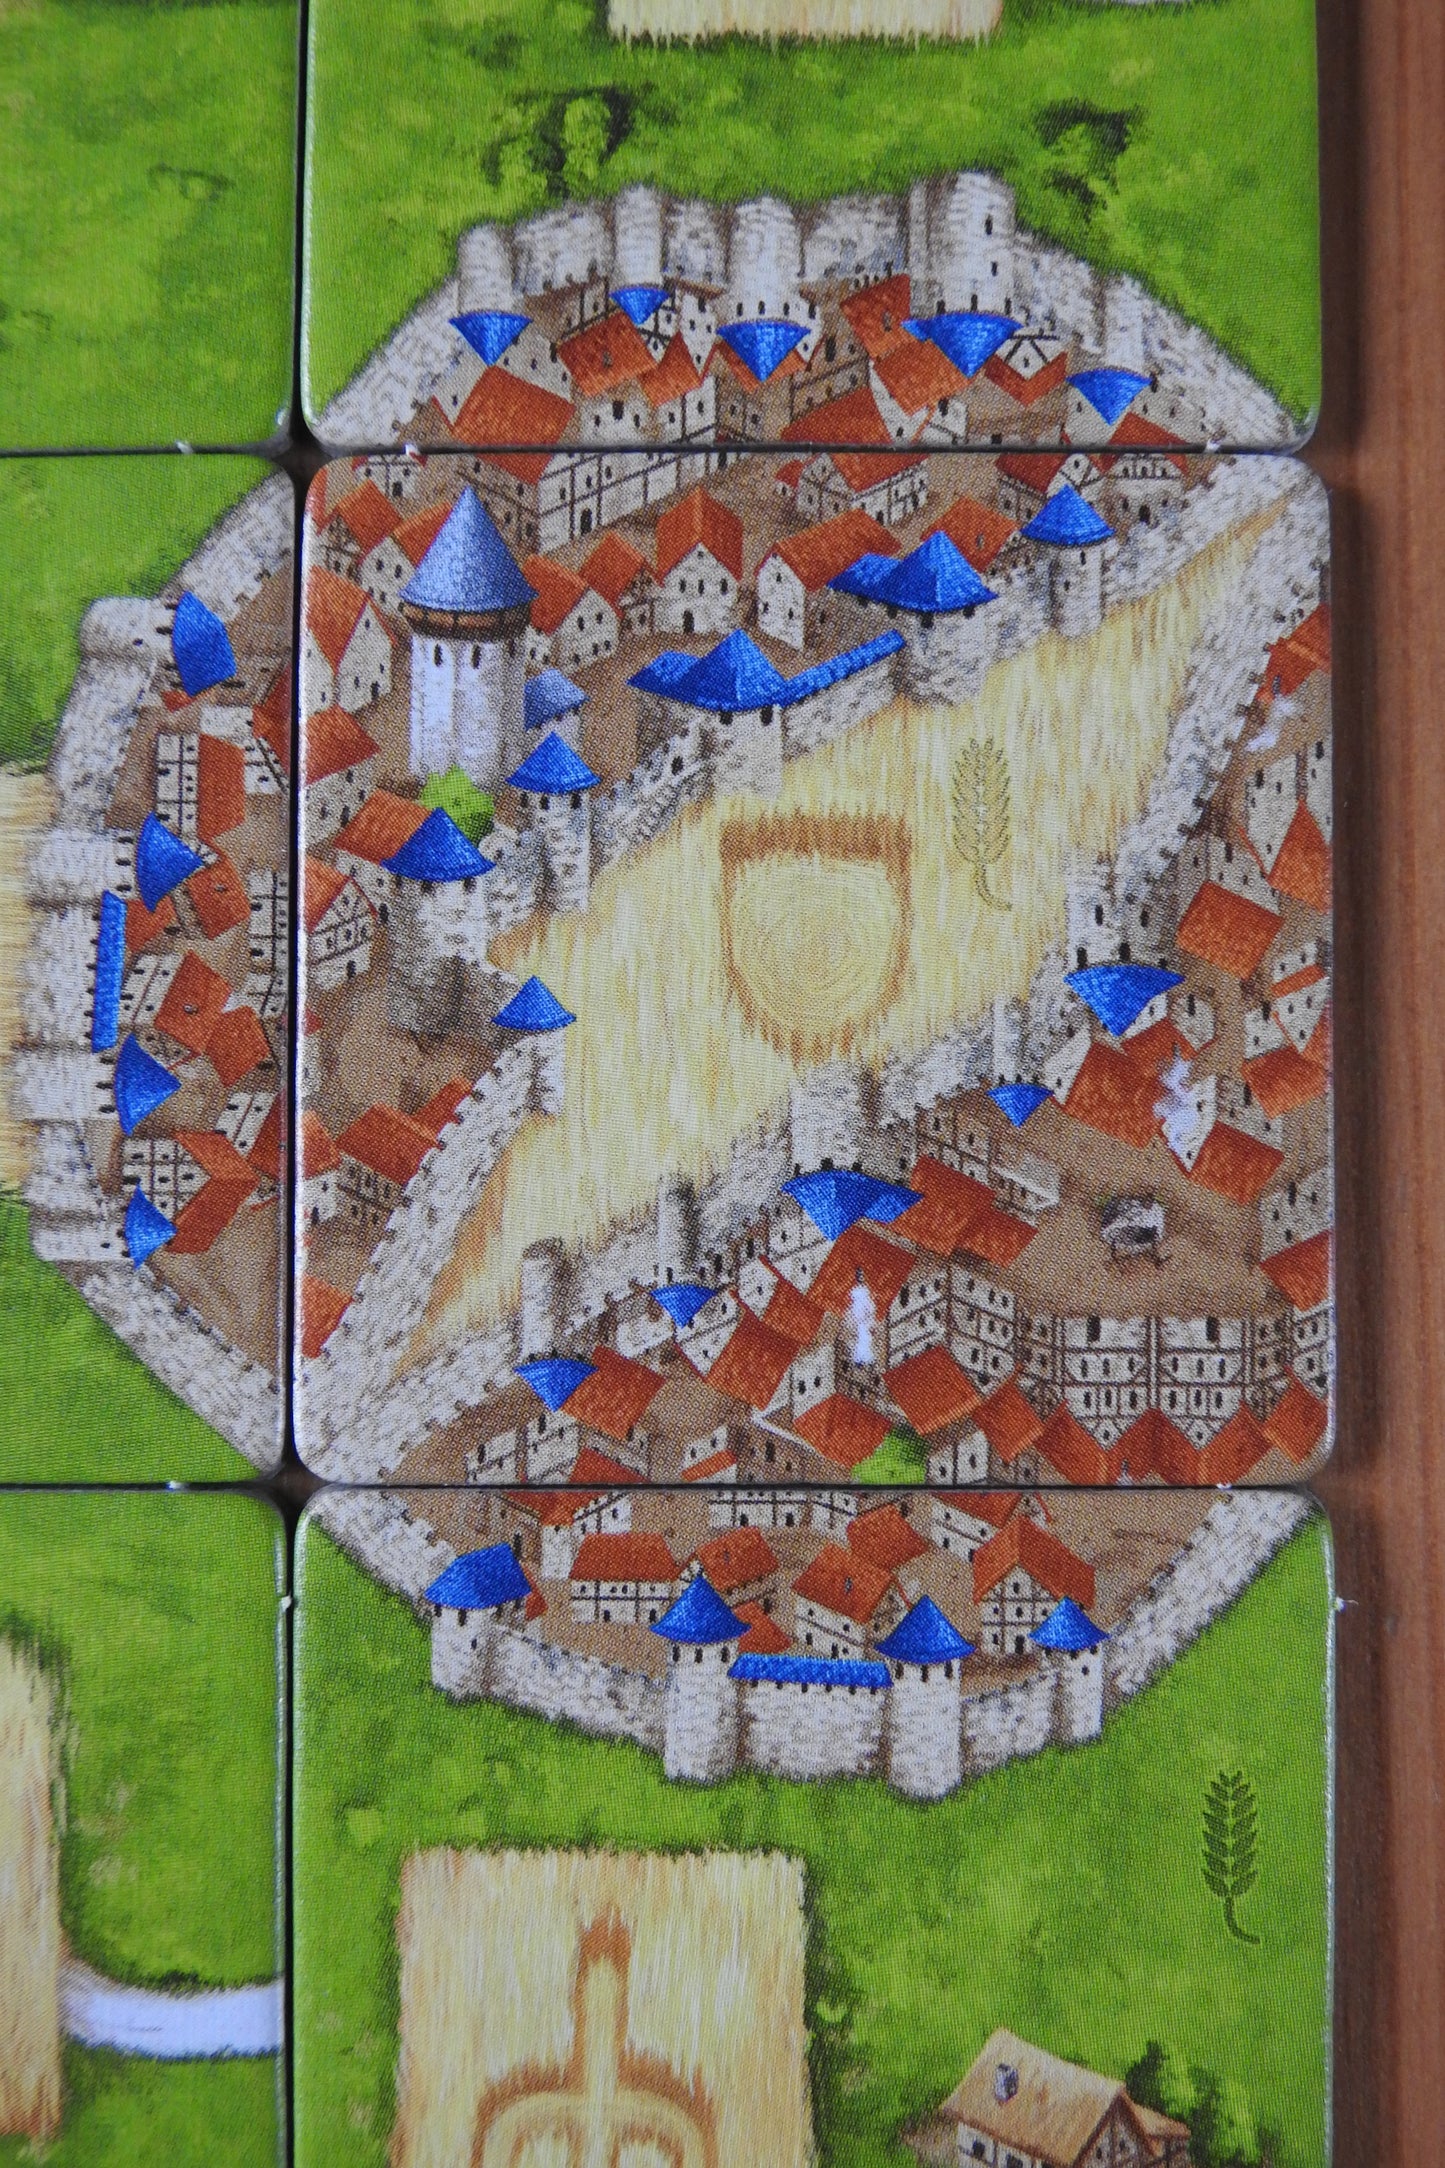 Close-up of one of the included tiles, featuring cornfields and two cities in this Carcassonne Corn Circles II expansion.